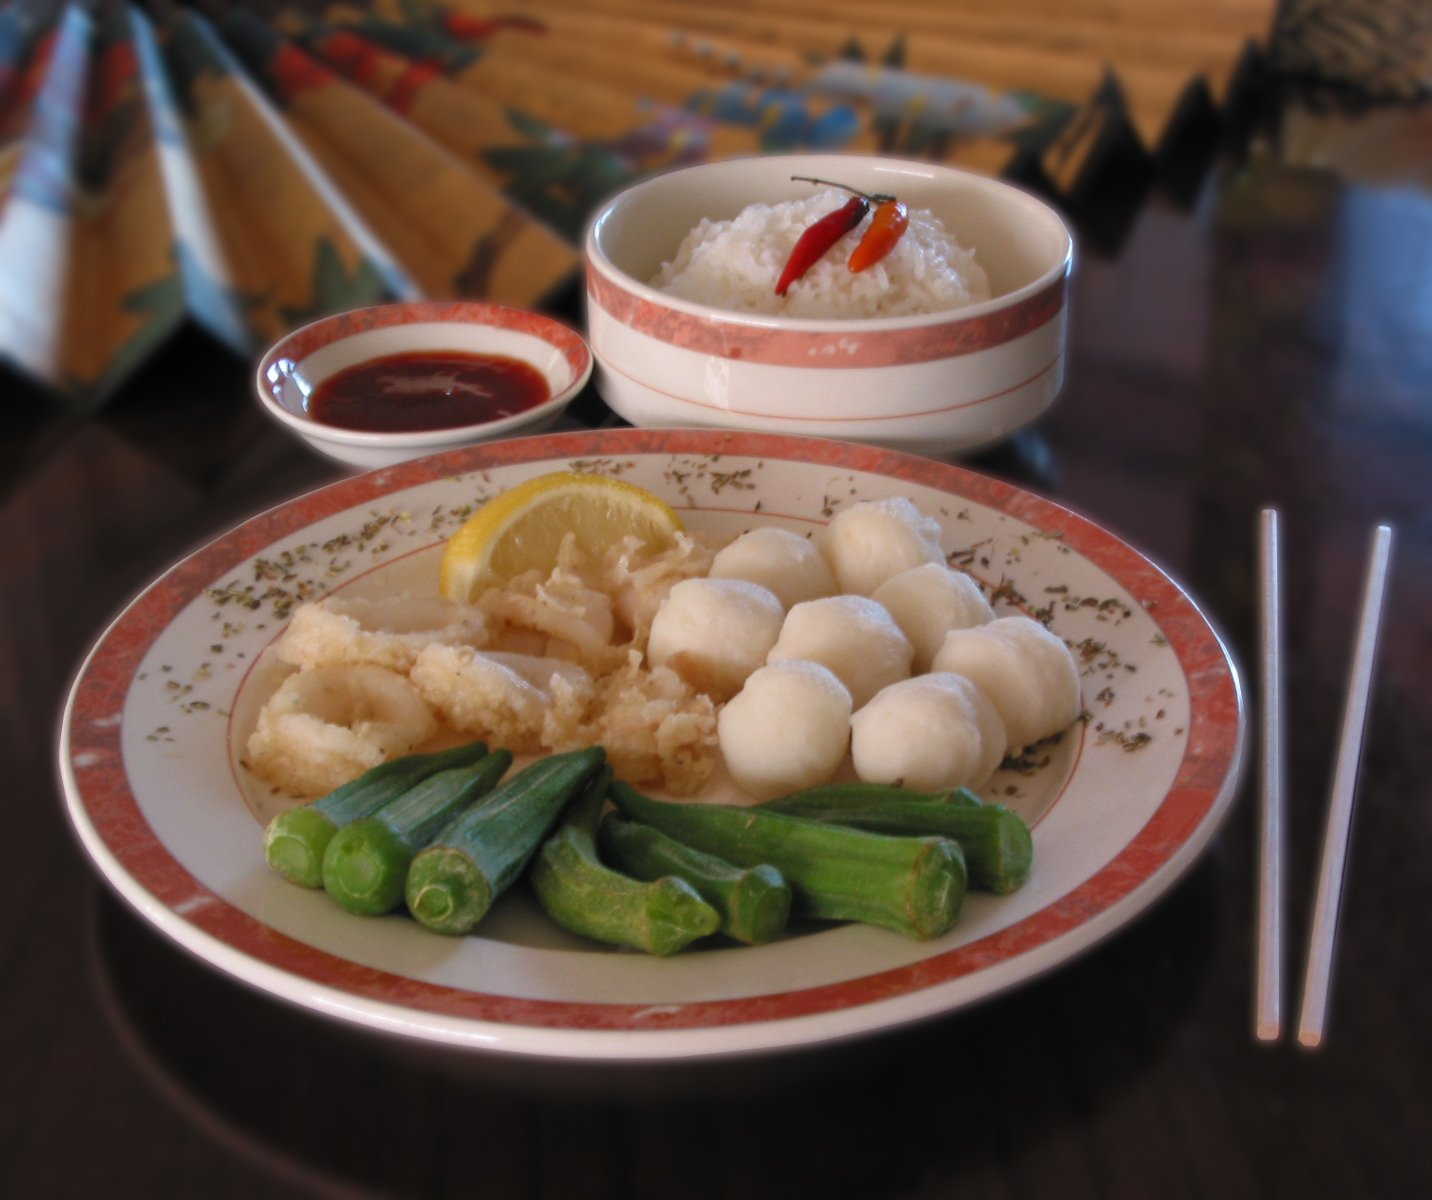 an oriental meal with scallops, asparagus, and rice